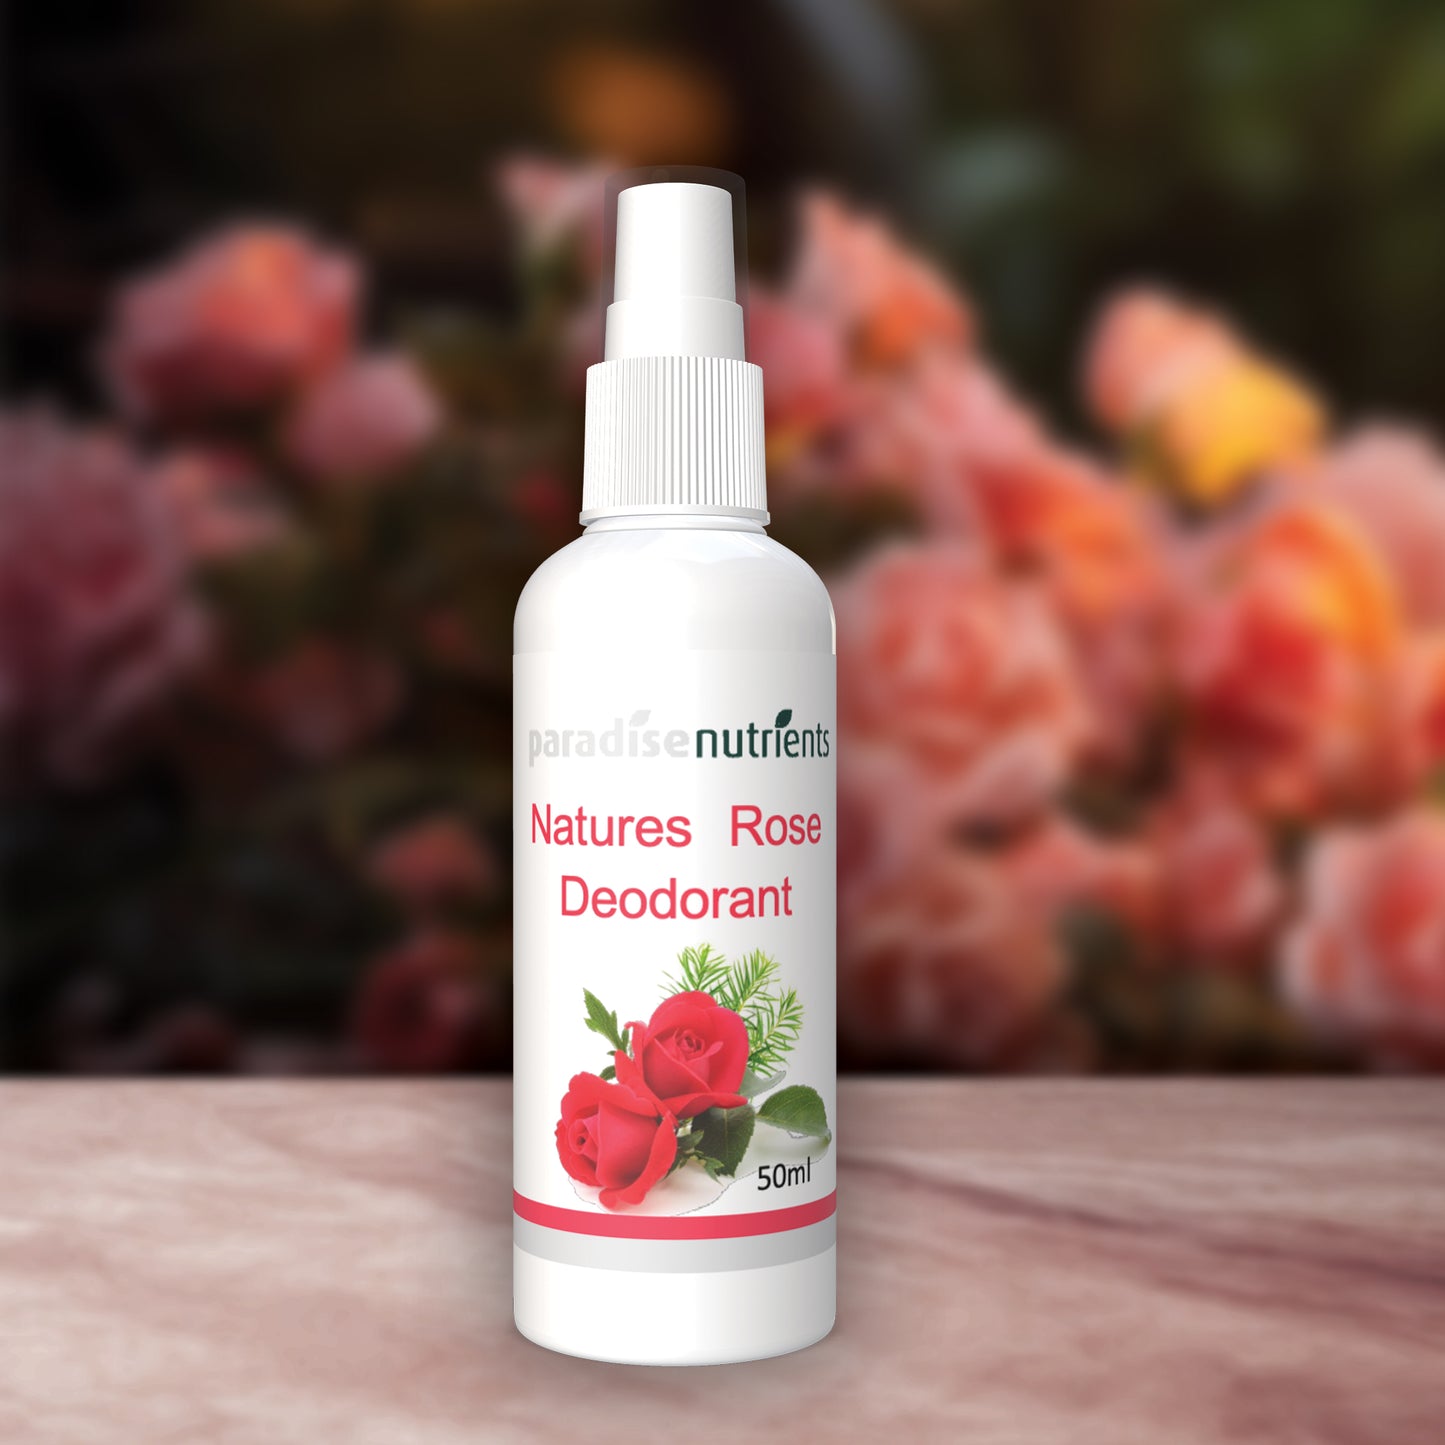 Nature's Rose Deodorant - Paradise Nutrients - More Than Charms